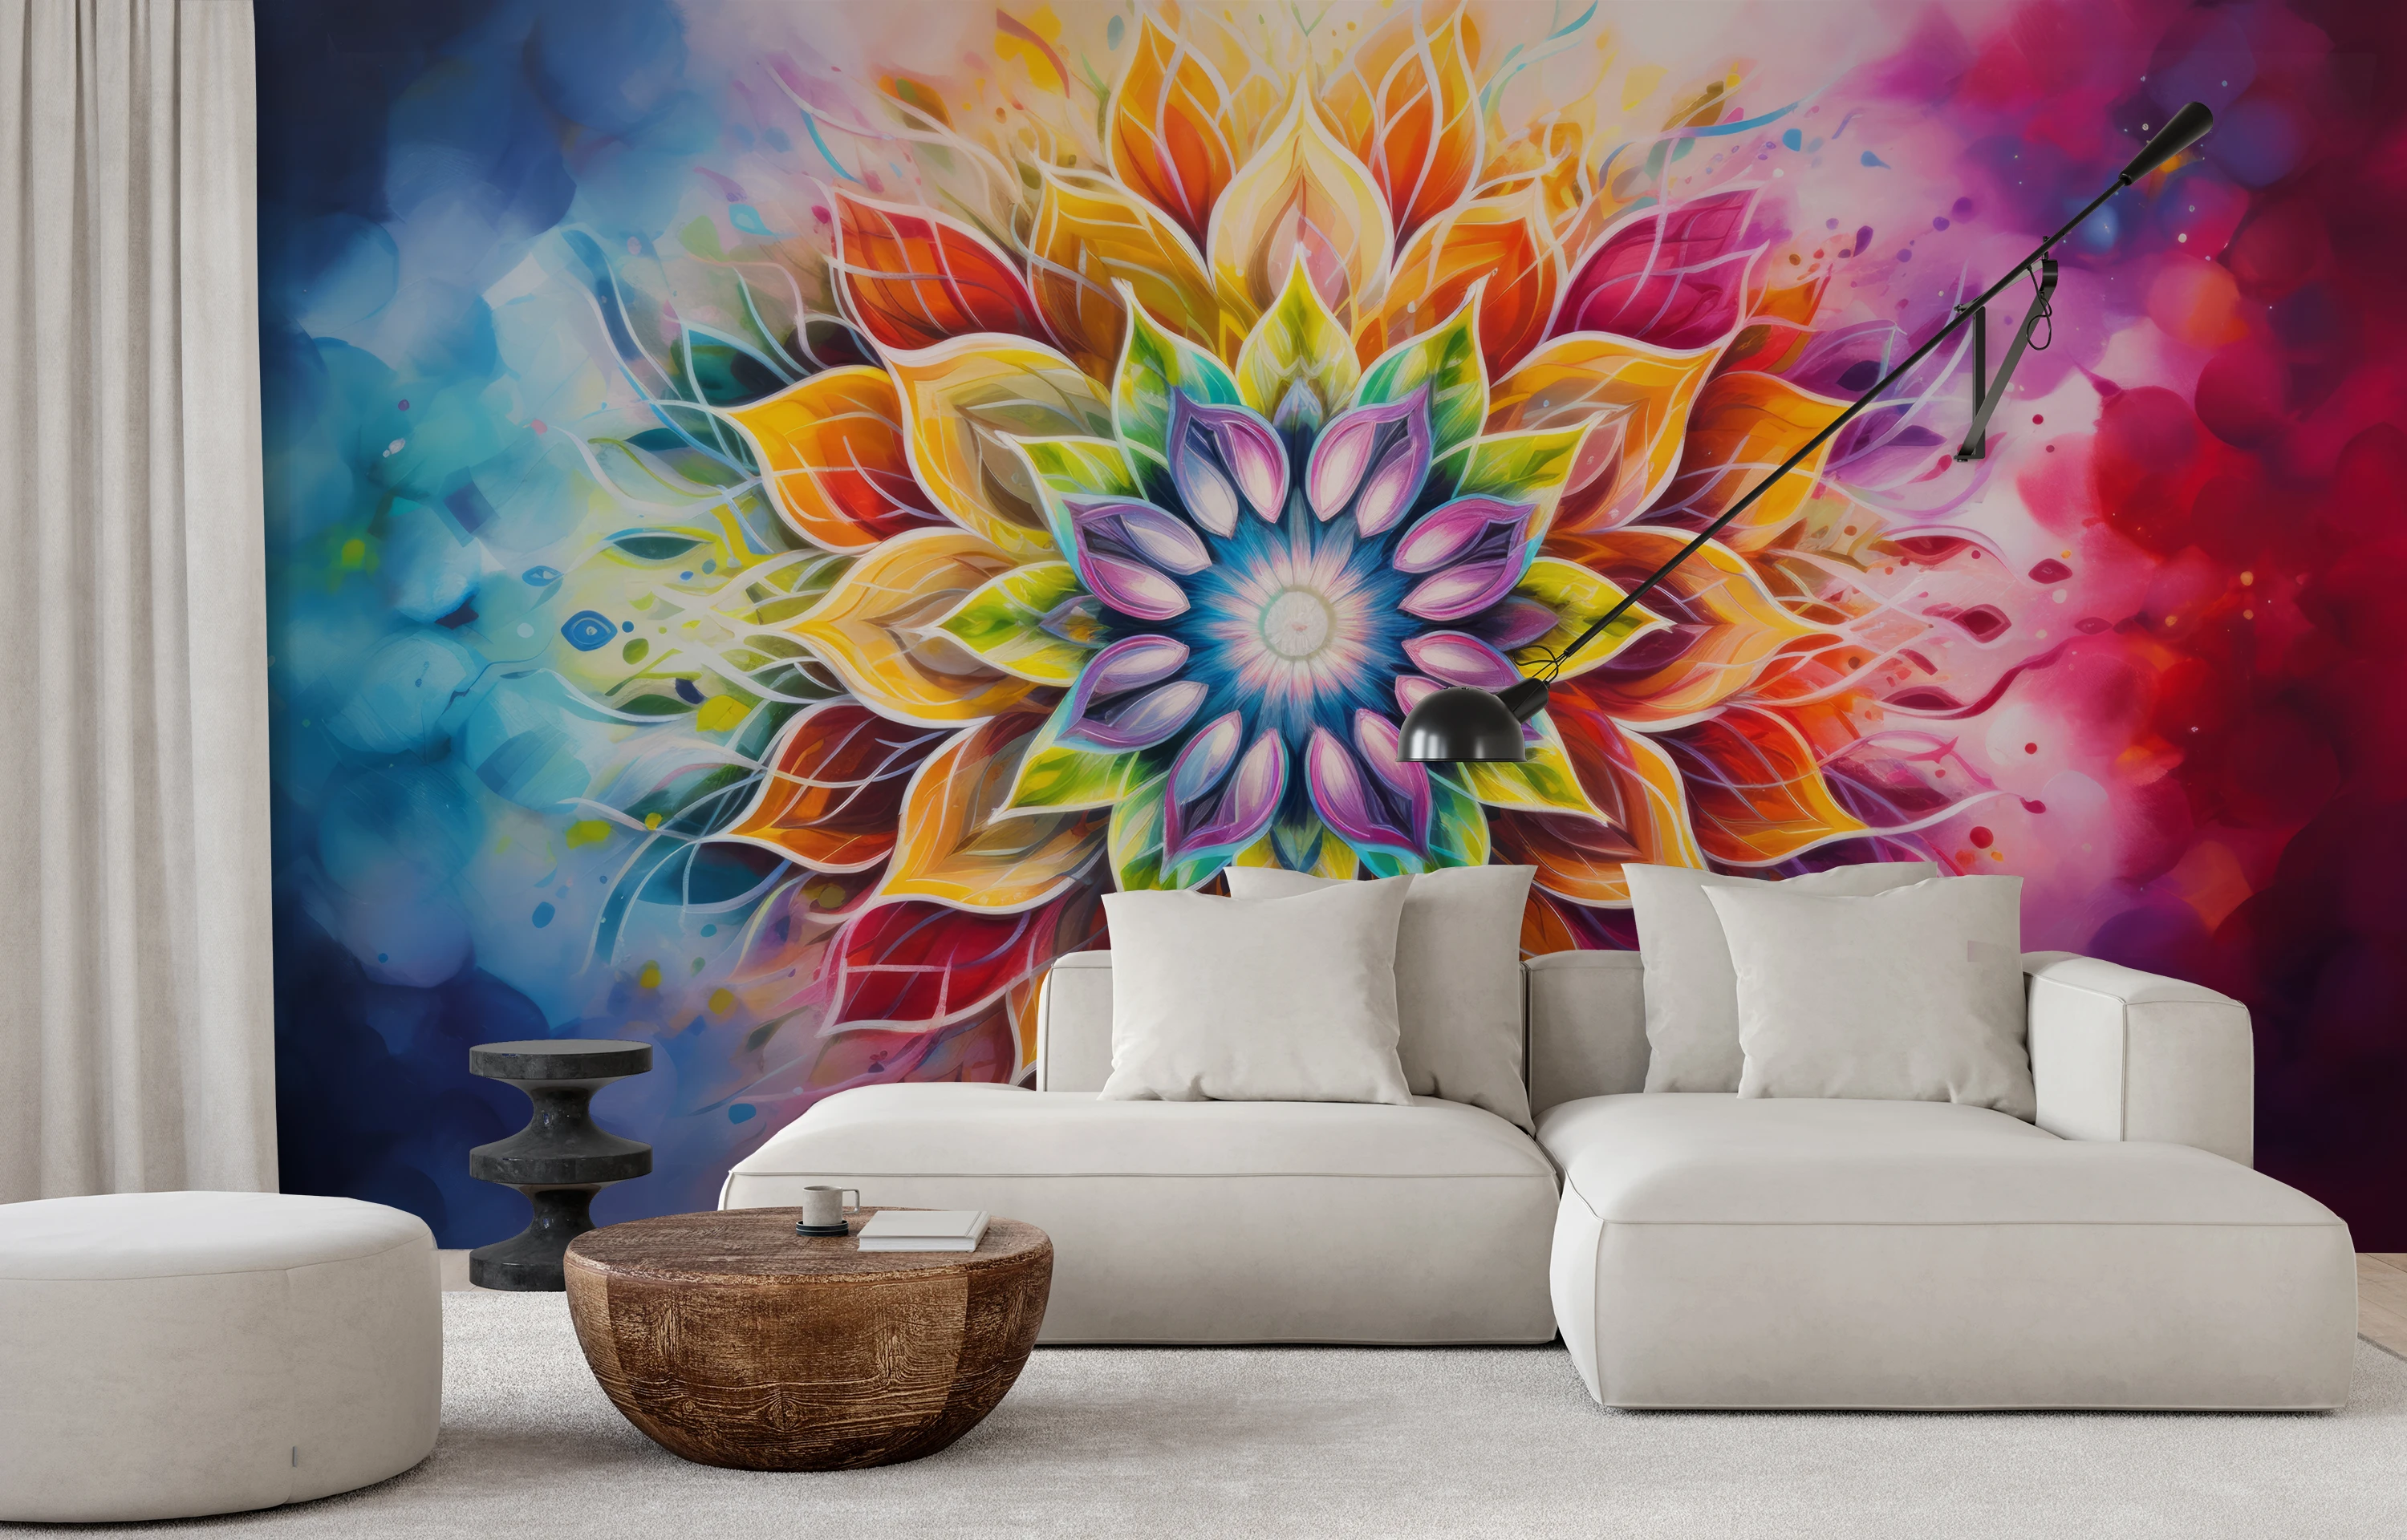 An energetic mandala with intense shades of purple, yellow and pink, expressing passion and spiritual vitality.